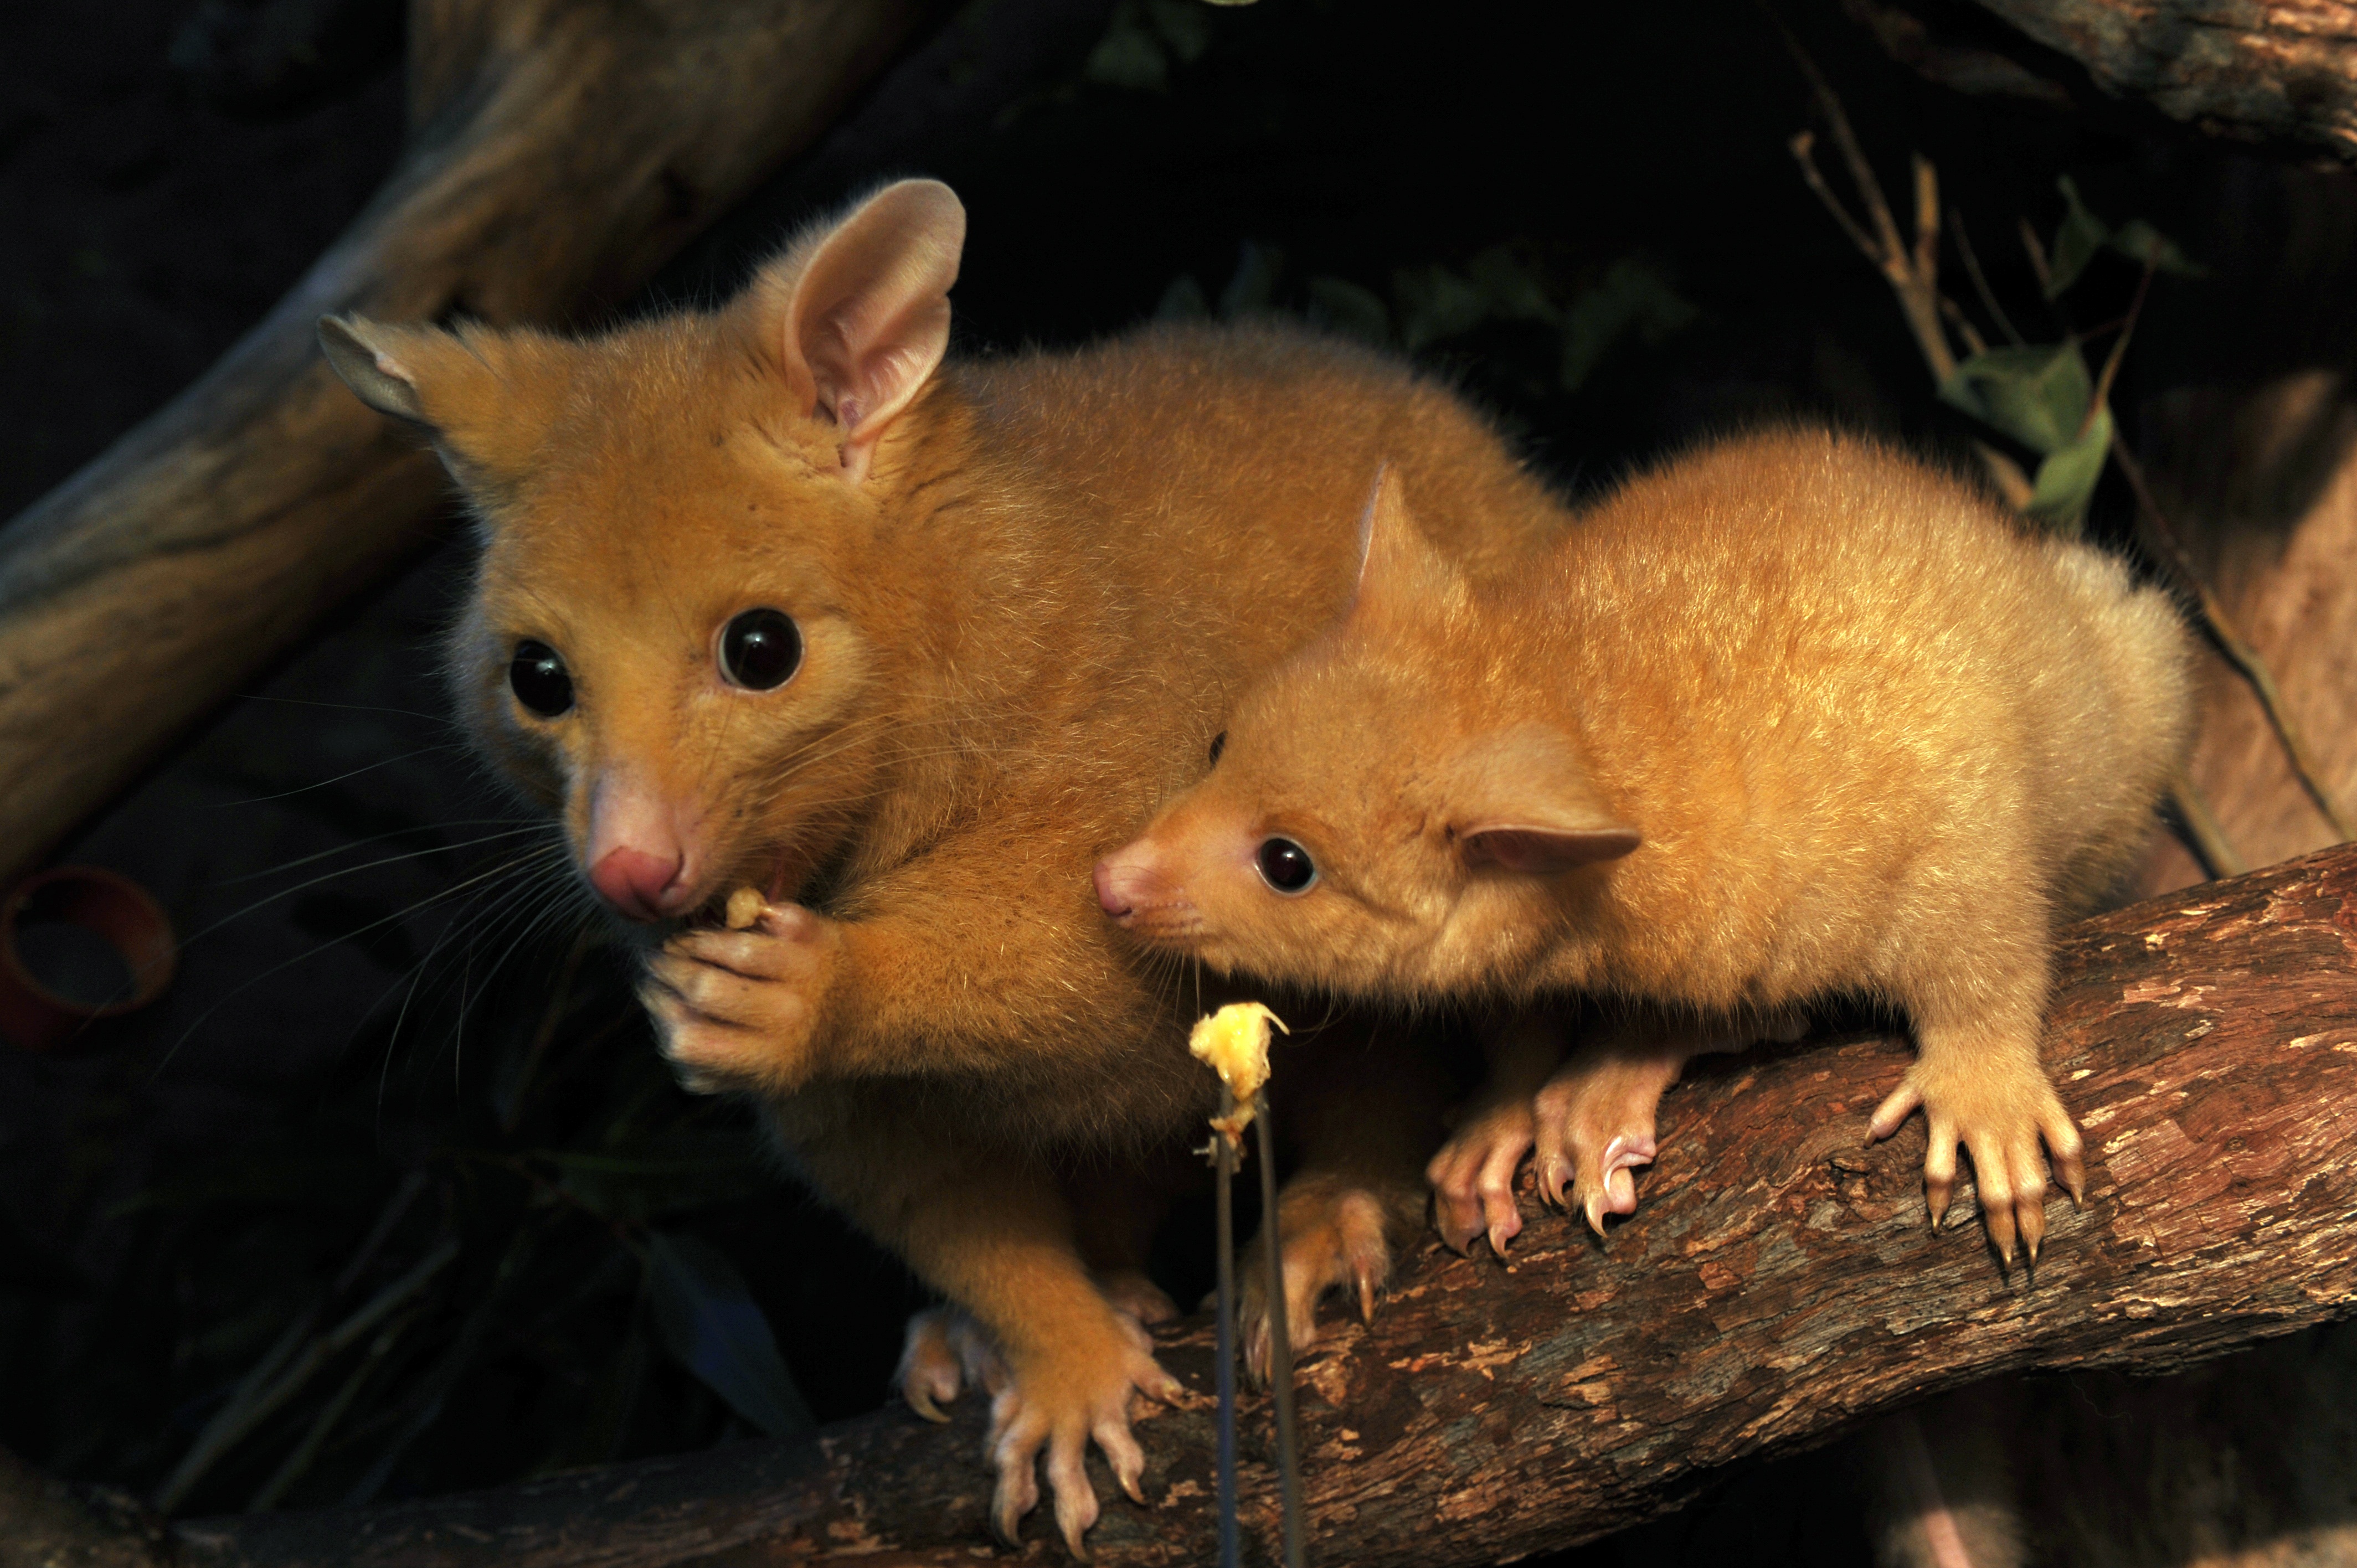 A five months of old male baby golden brushtail possum named Cooper (R) is fed by a caretaker while his mother named Cascade eats at the Wild Life zoo in Sydney's central district on September 14, 2012. Joey's birth in April is the fourth succesful captive breeding program by Wild Life on the rare golden brushtail possum whose unique color is due to low levels of melanin in their skin and makes them highly visible to predators in the Australian wilds. AFP PHOTO / ROMEO GACAD / AFP PHOTO / ROMEO GACAD